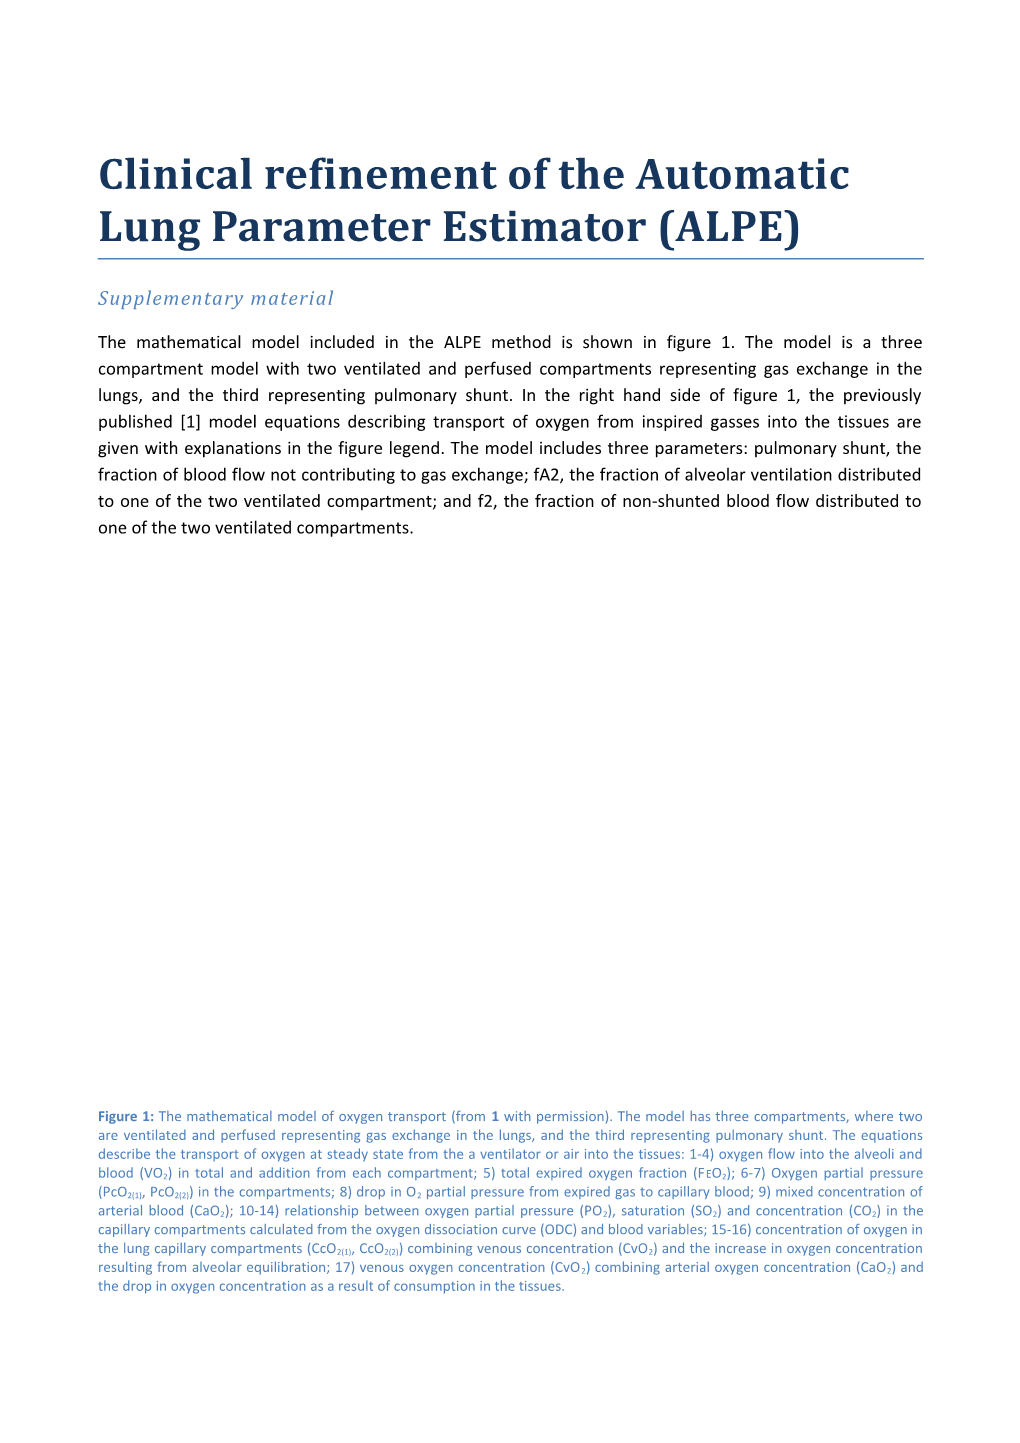 Clinical Refinement of the Automatic Lung Parameter Estimator (ALPE)